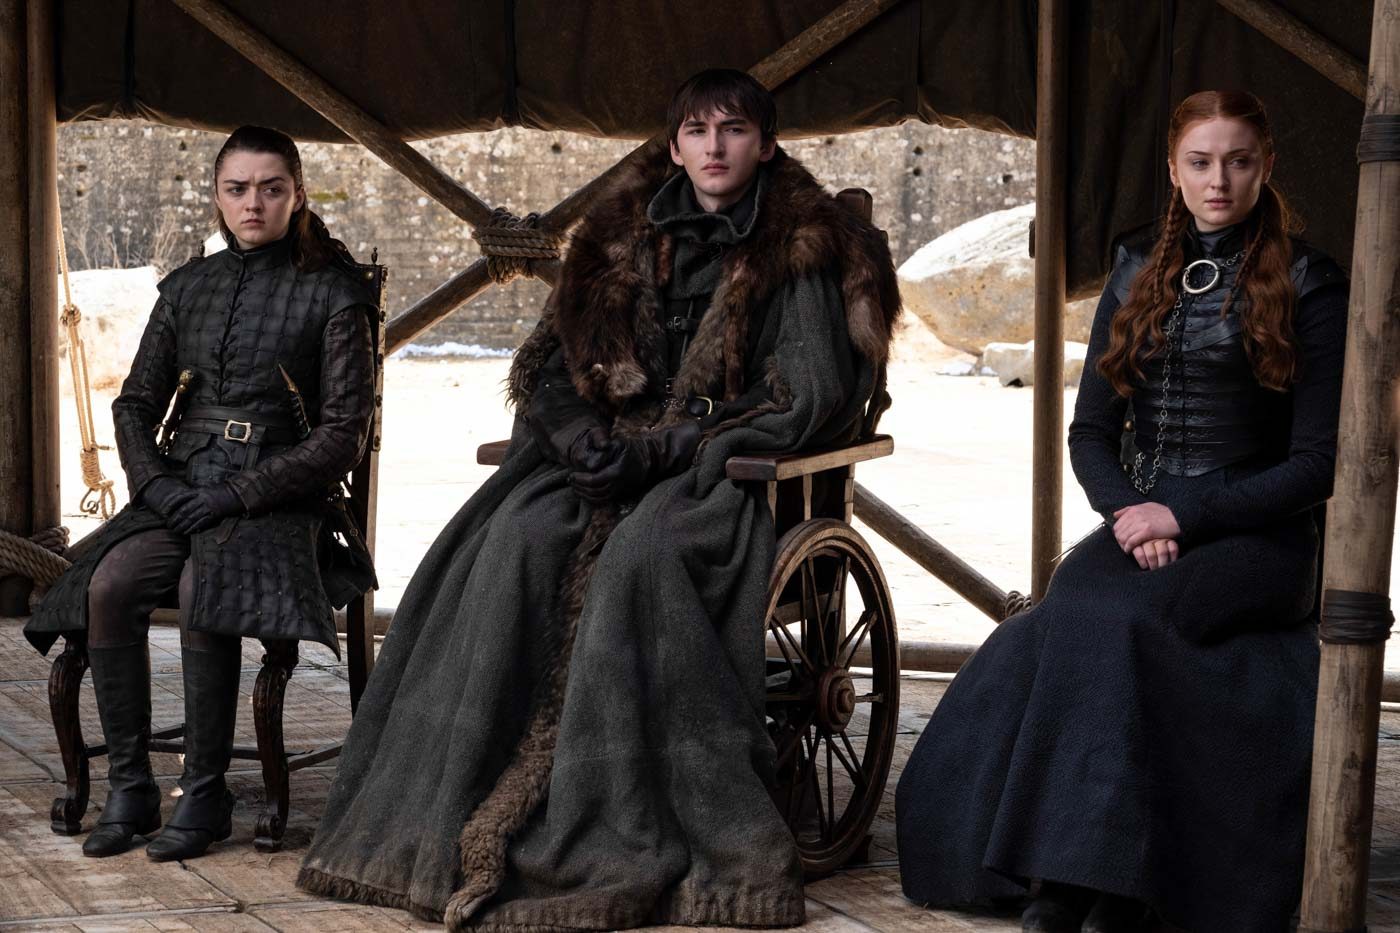 For the Iron Throne: Fans react to ‘Game of Thrones’ finale